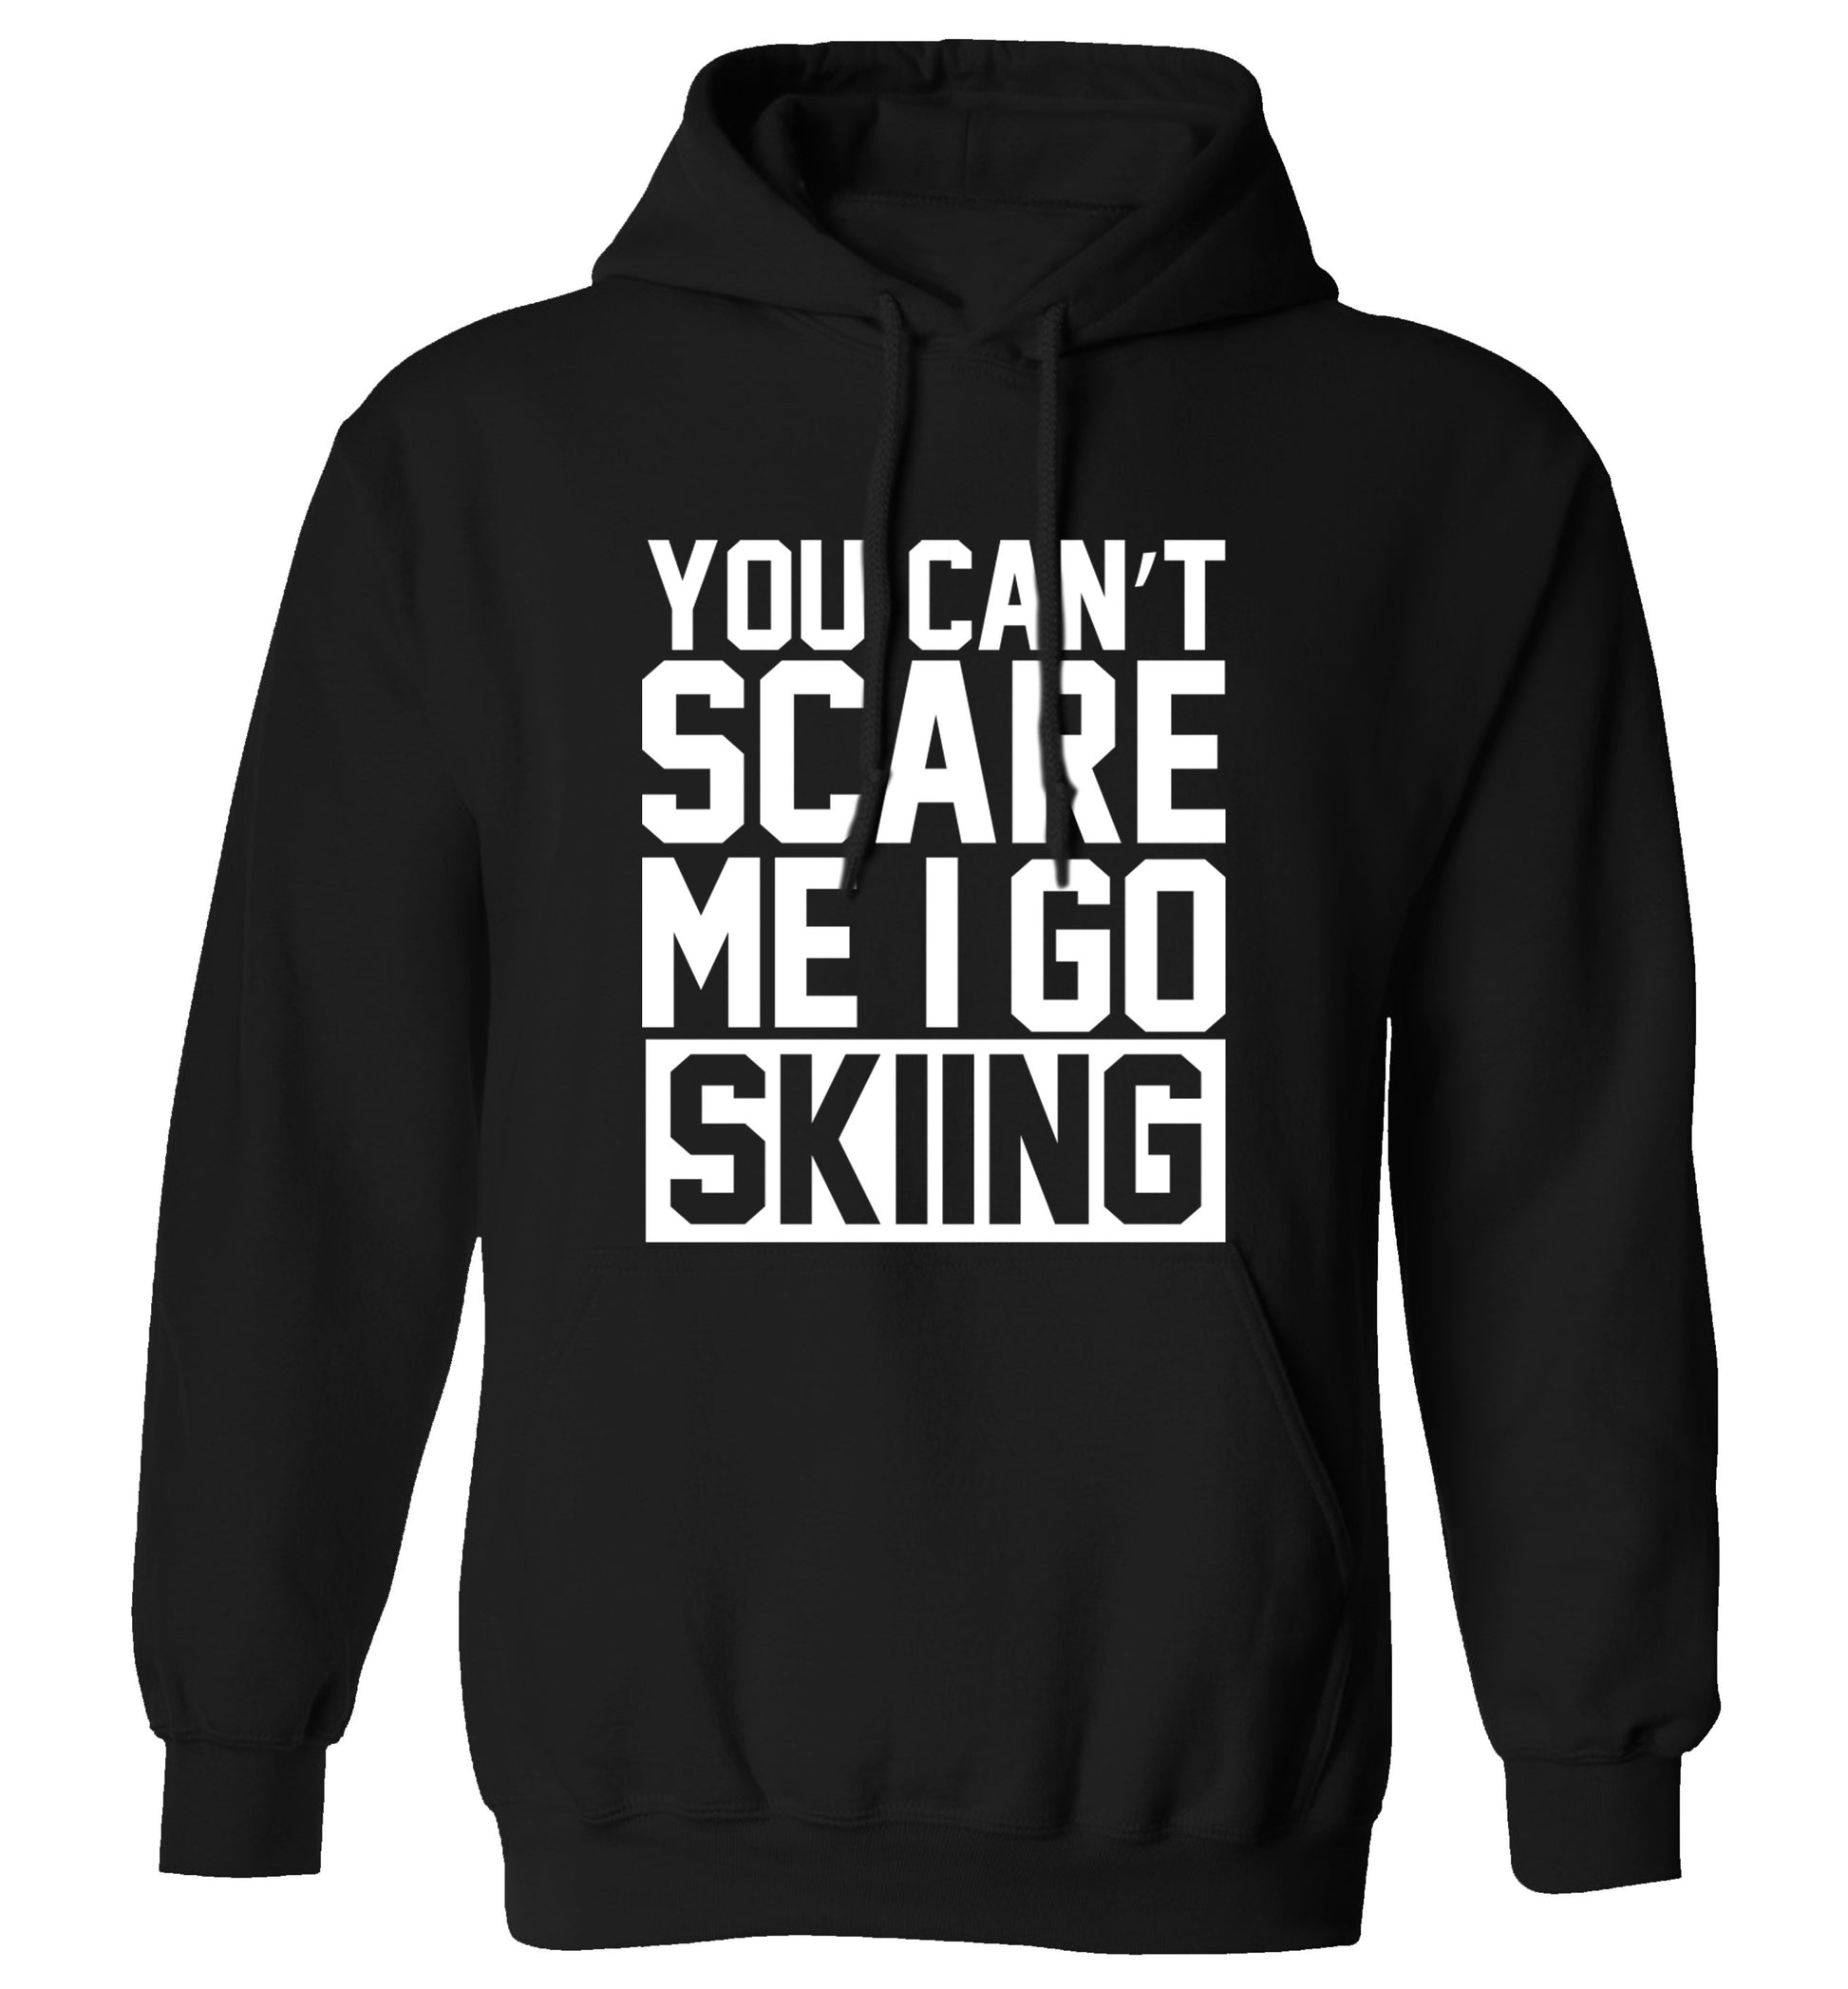 You can't scare me I go skiing adults unisex black hoodie 2XL